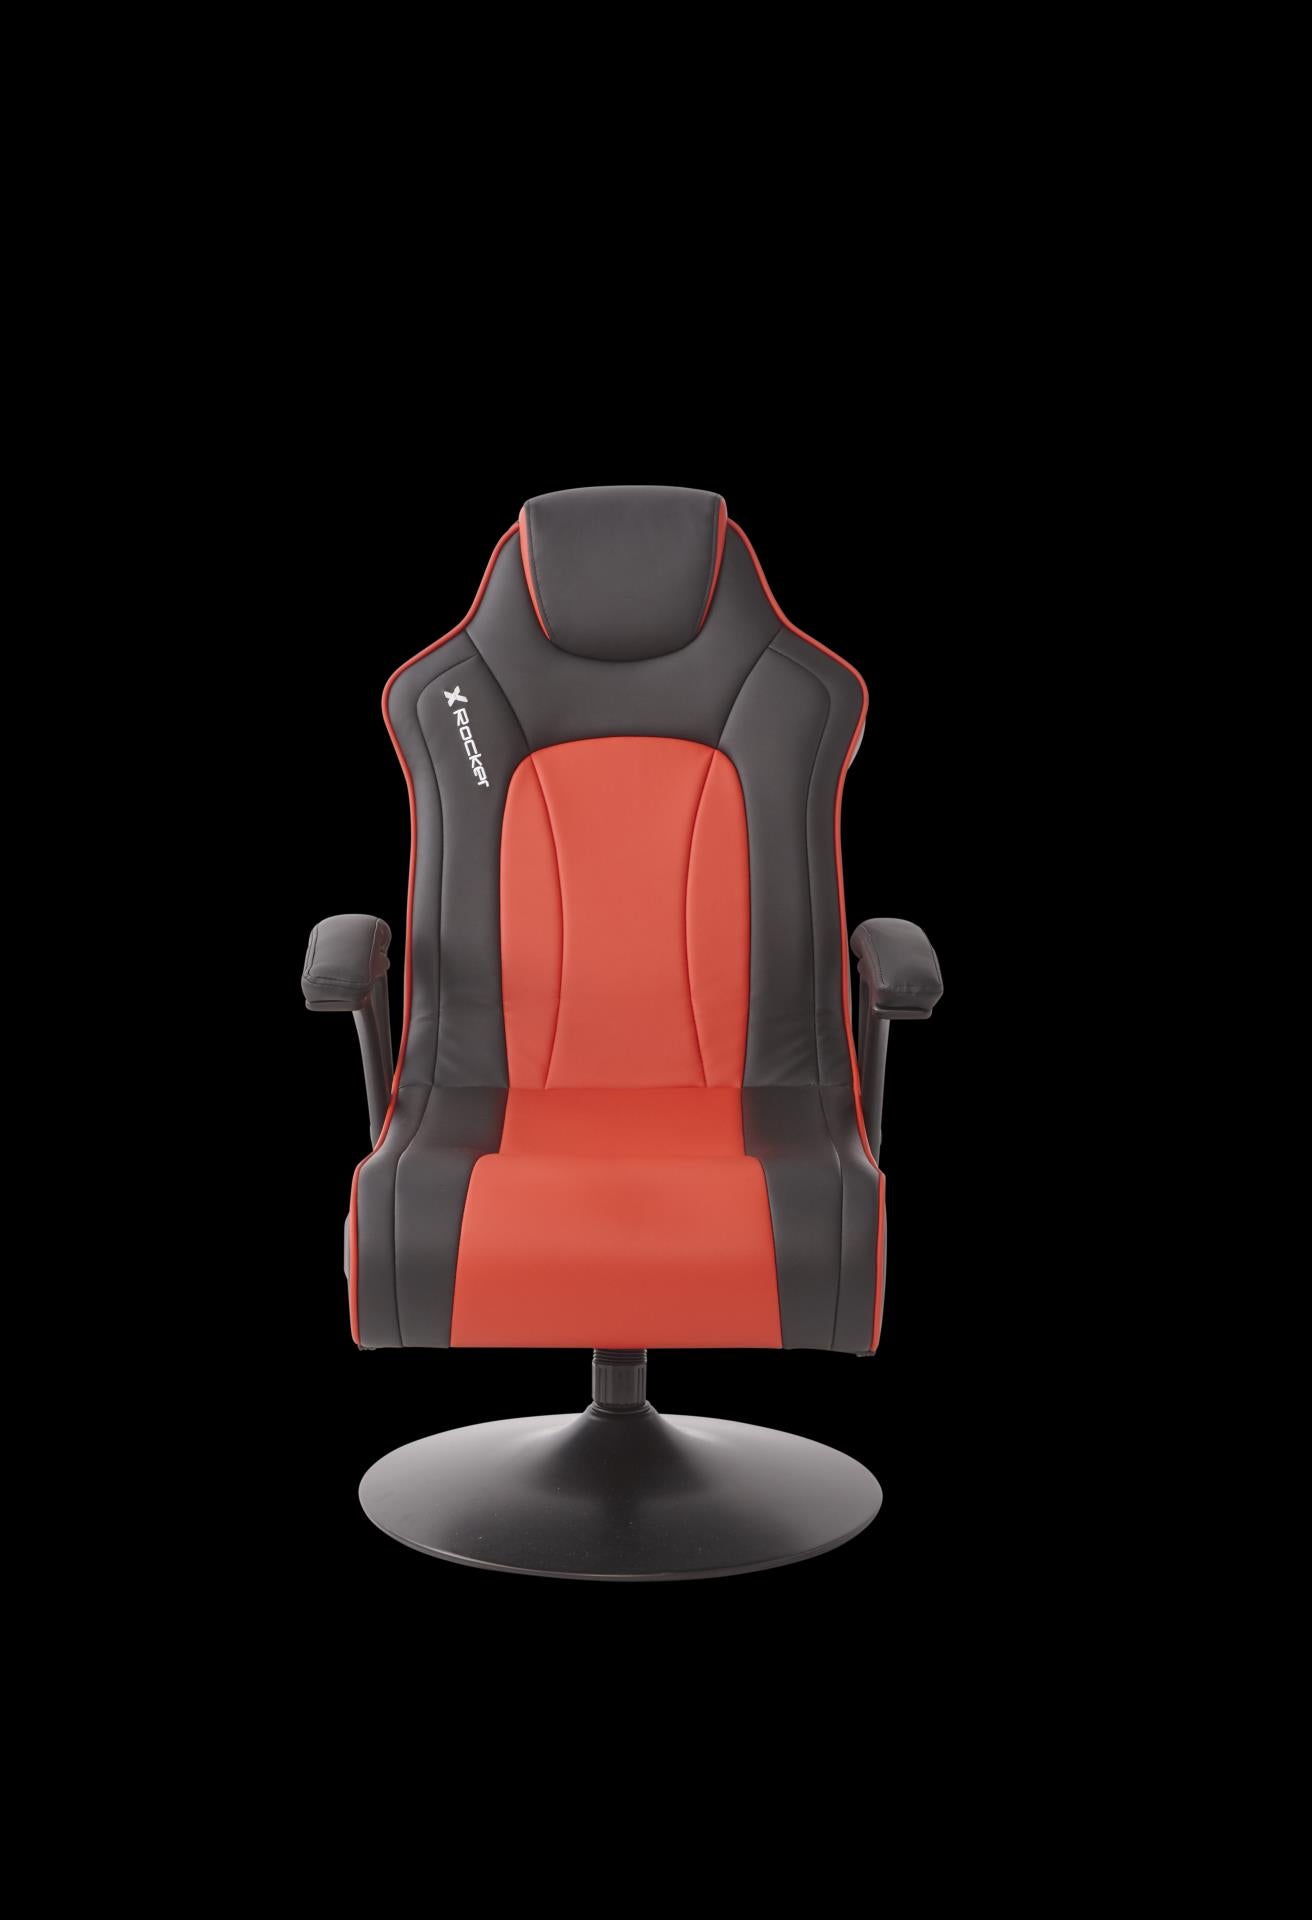 X Rocker - Torque Wireless 2.1 Red and Black Gaming Chair